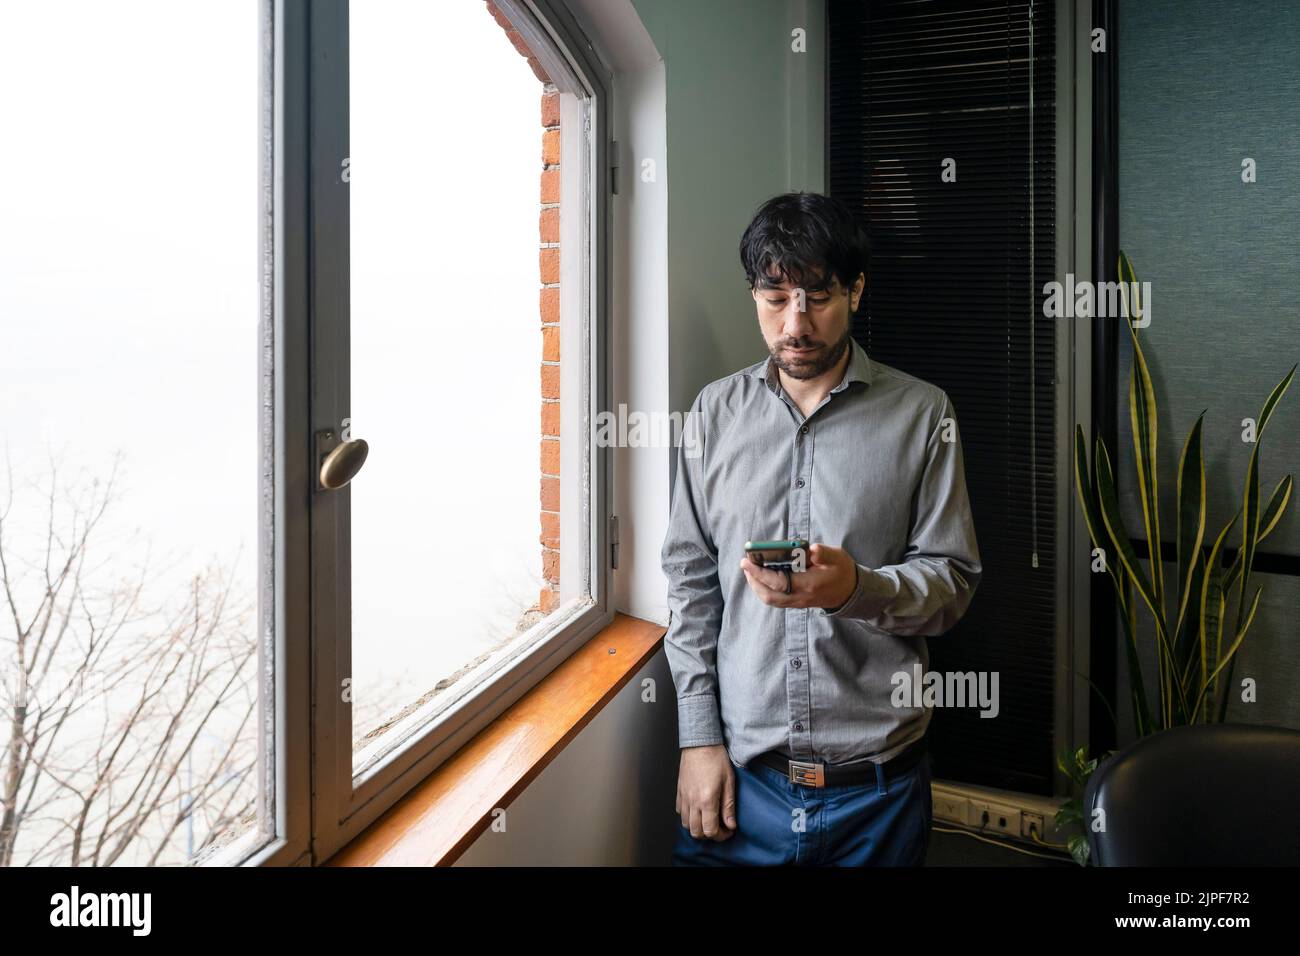 Latino businessman working in an office overlooking the river using the phone. Stock Photo